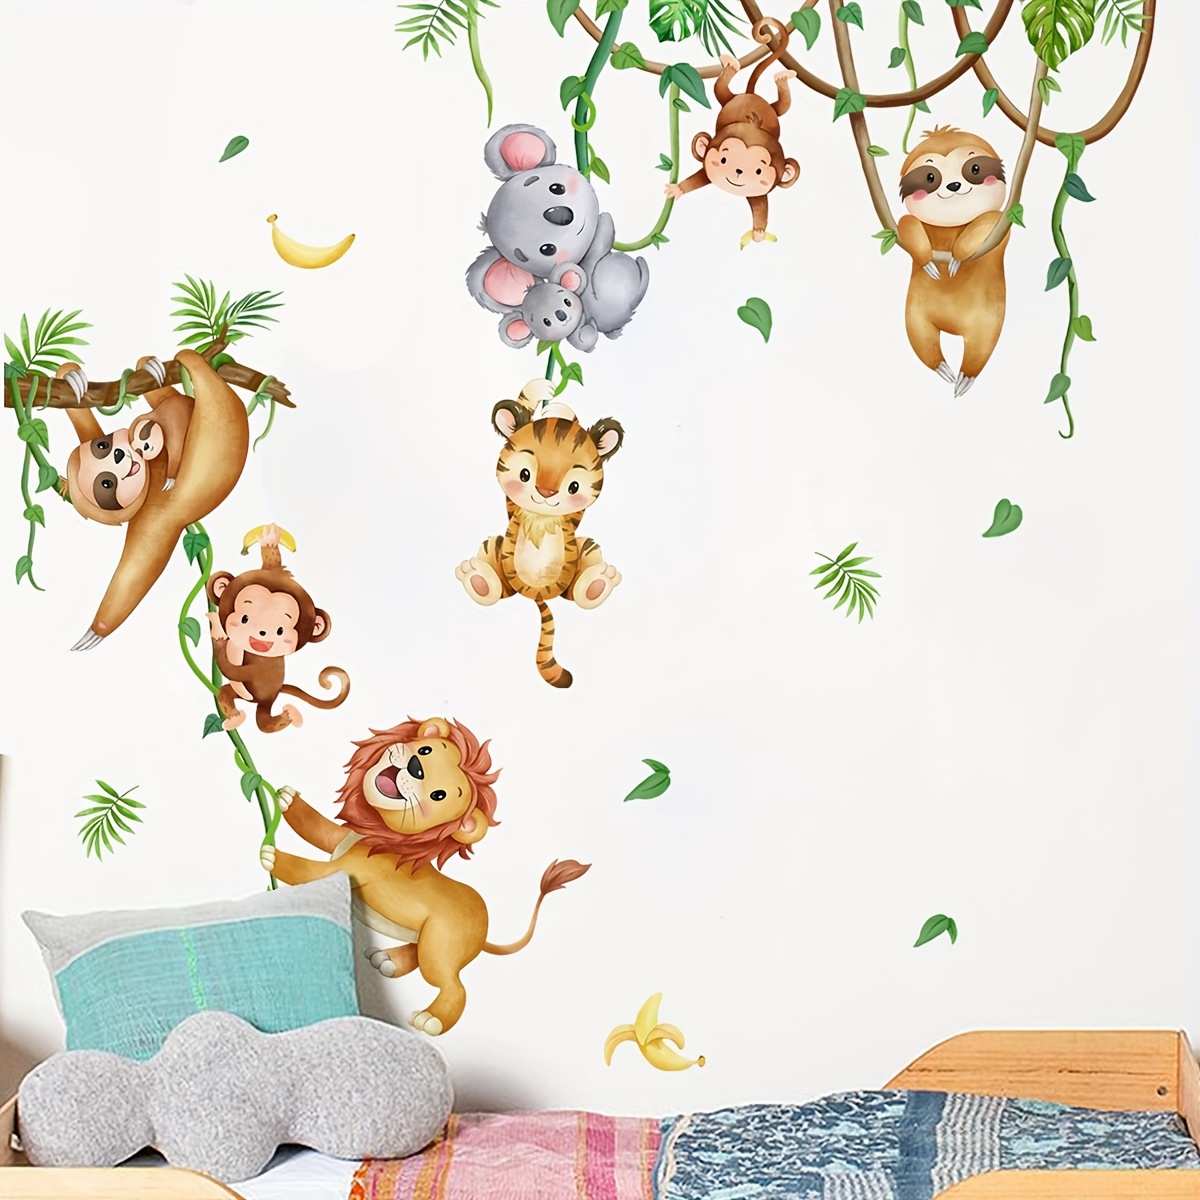 

Set Of 2 Creative Wall Sticker, Tree Branches Vine Monkey Pattern Self-adhesive Wall Stickers, Bedroom Entryway Living Room Porch Home Decoration Wall Stickers, Removable Stickers, Wall Decor Decals